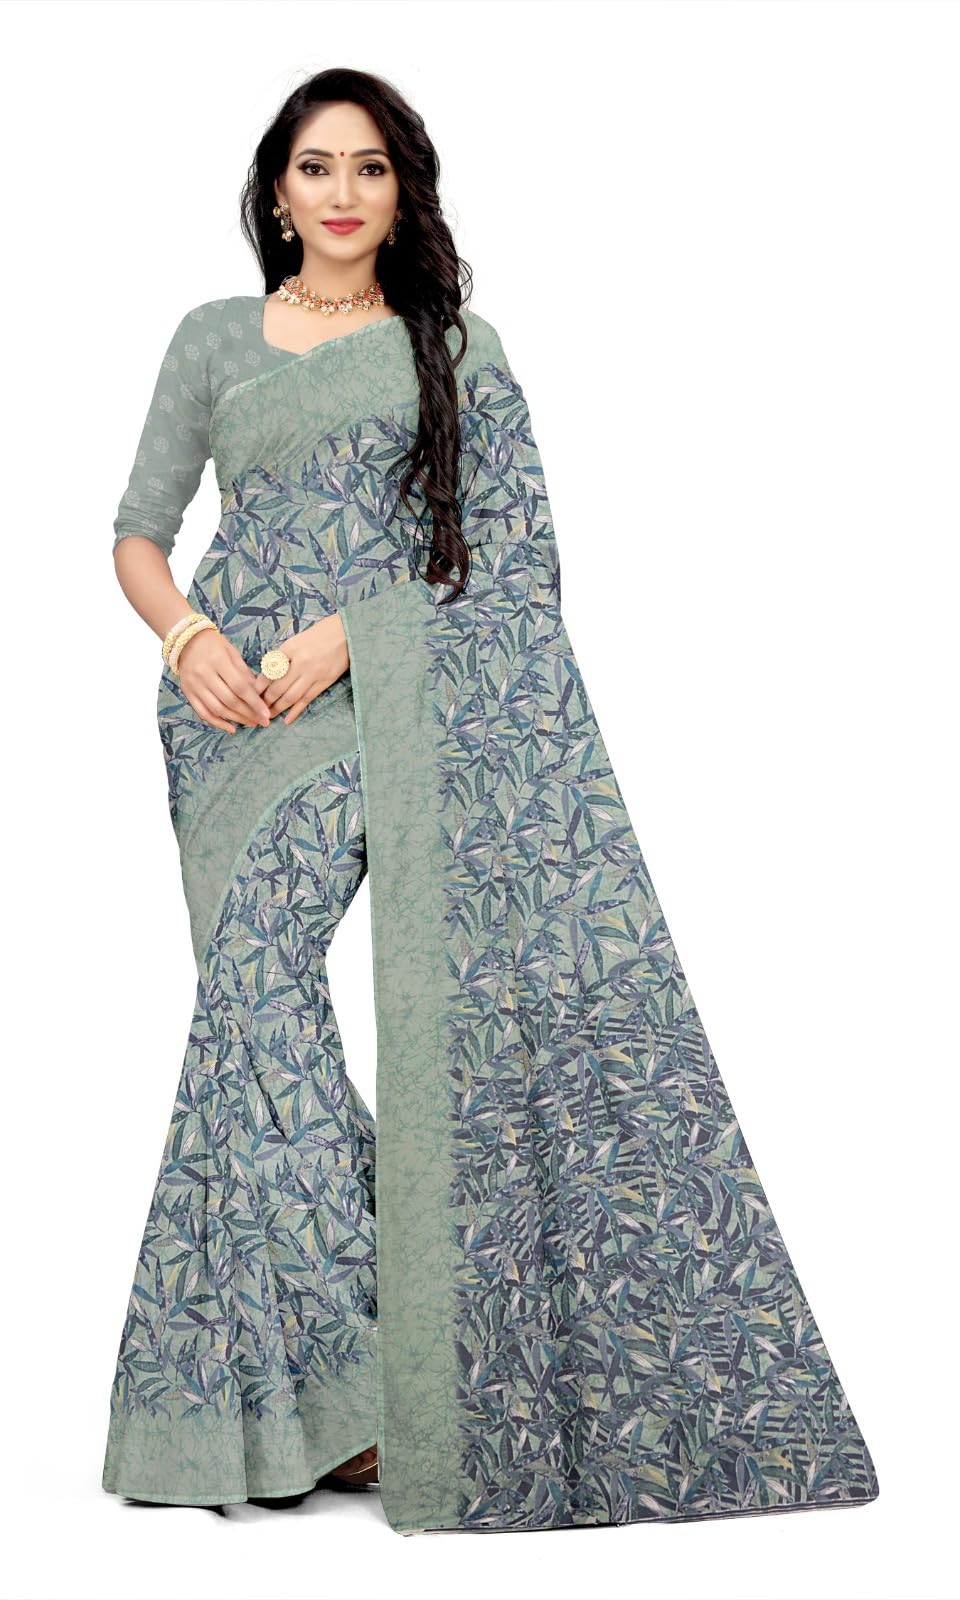 KHUSHBOO DESIGNERS Women's Solid Georgette 5.5 Meter Saree with Unstitched Blouse Piece (Blue).